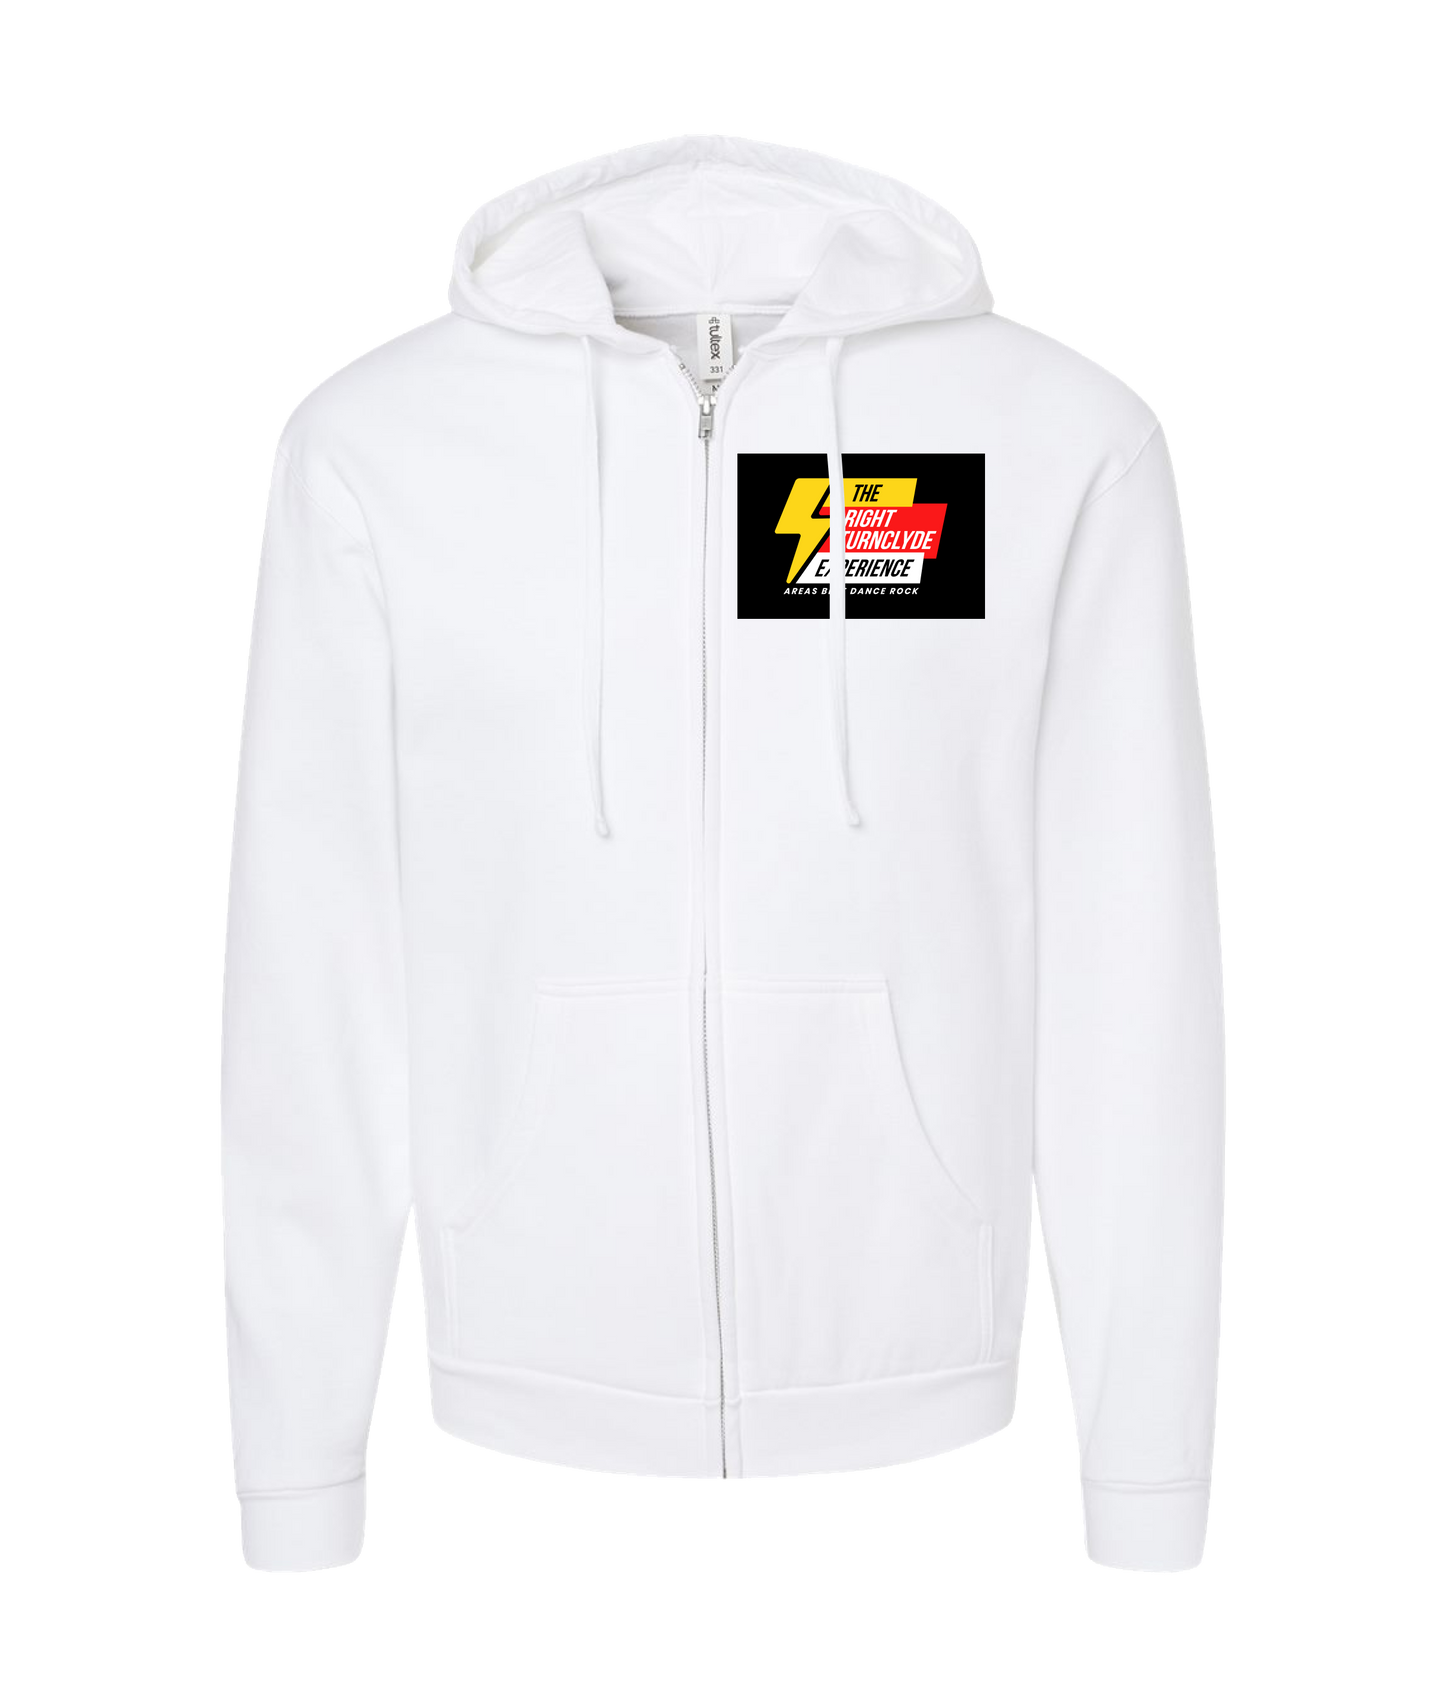 Right TurnClyde "Brucie Gear" Merchandise - The Experience - White Zip Up Hoodie